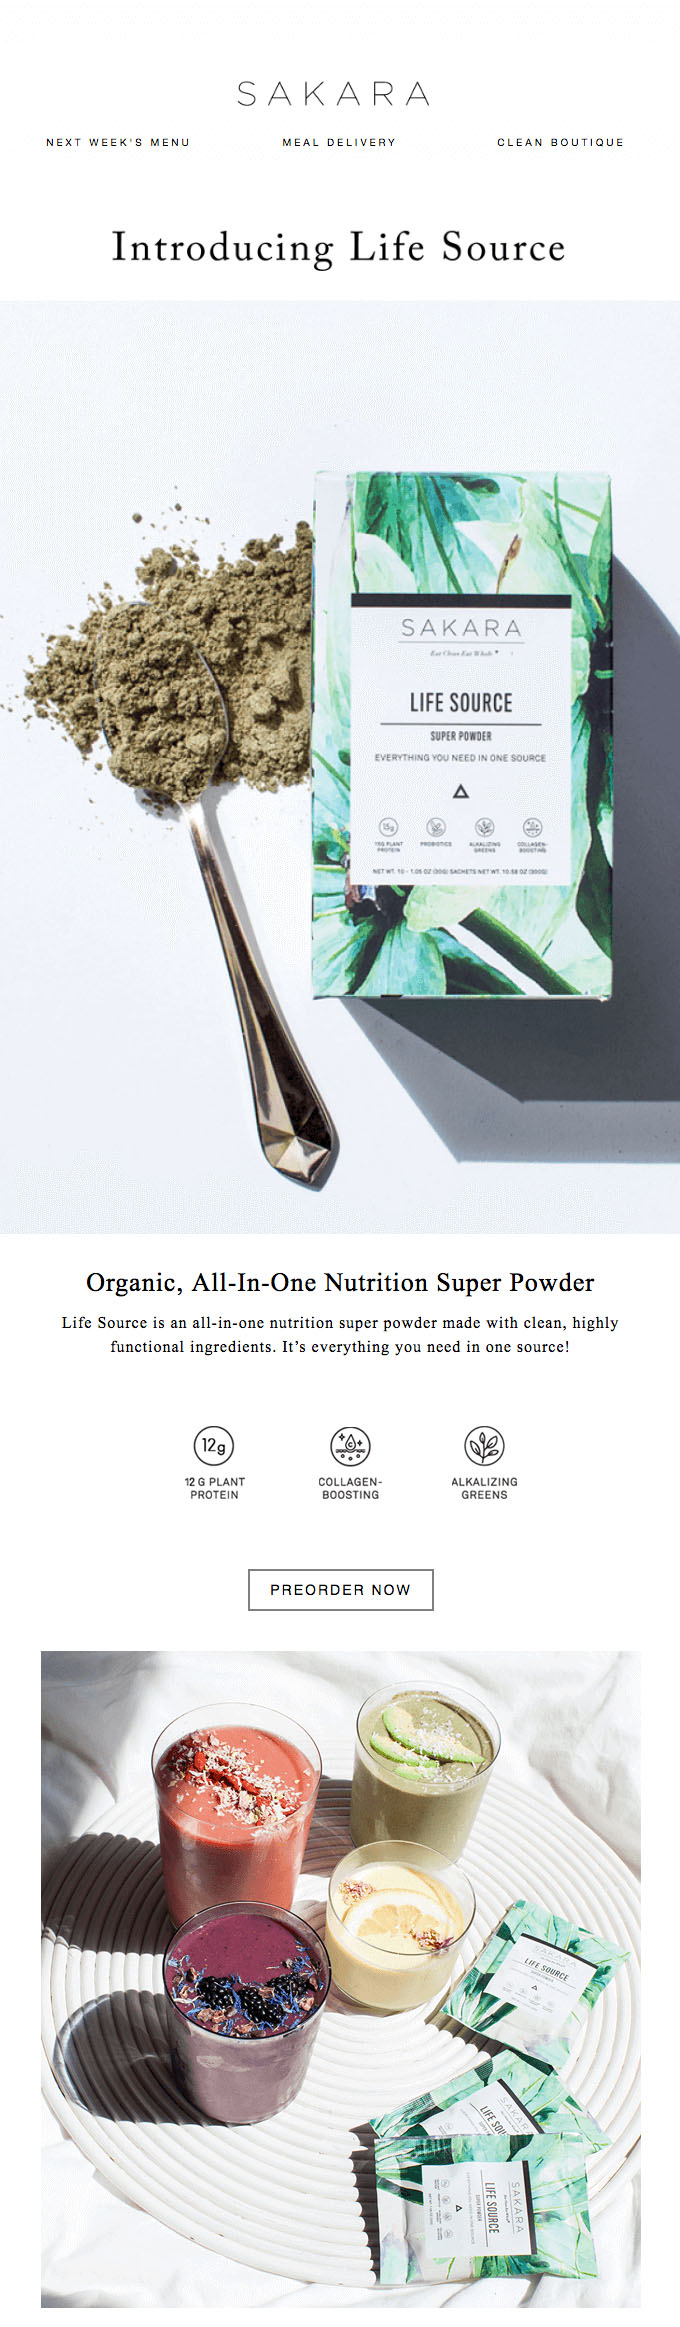 Subscriber Emails - New Product Announcement Email - Sakara